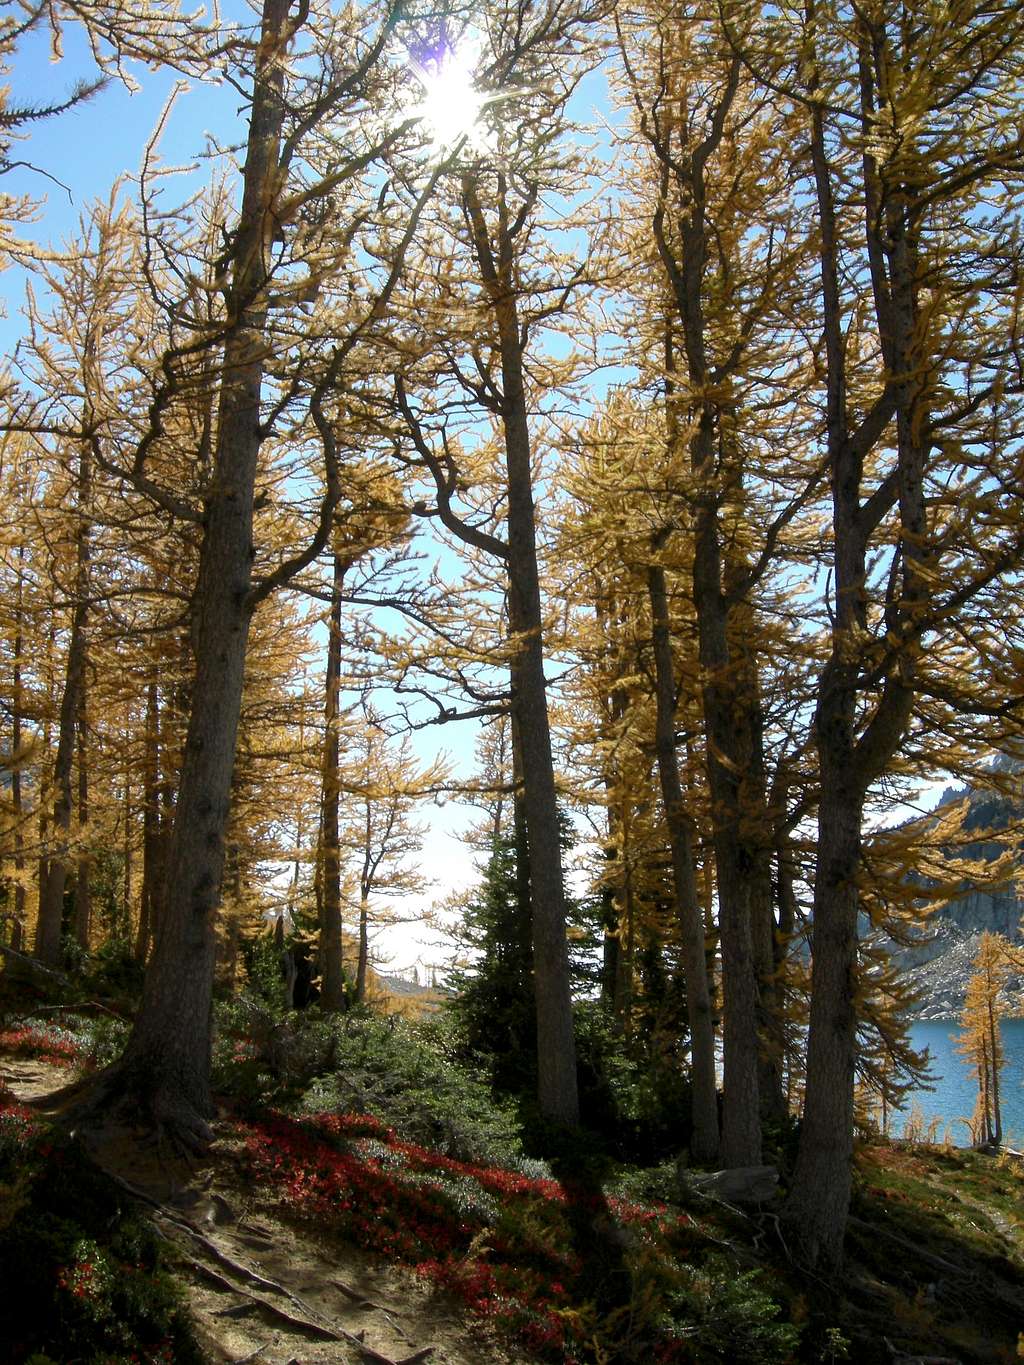 Larches and huckleberry